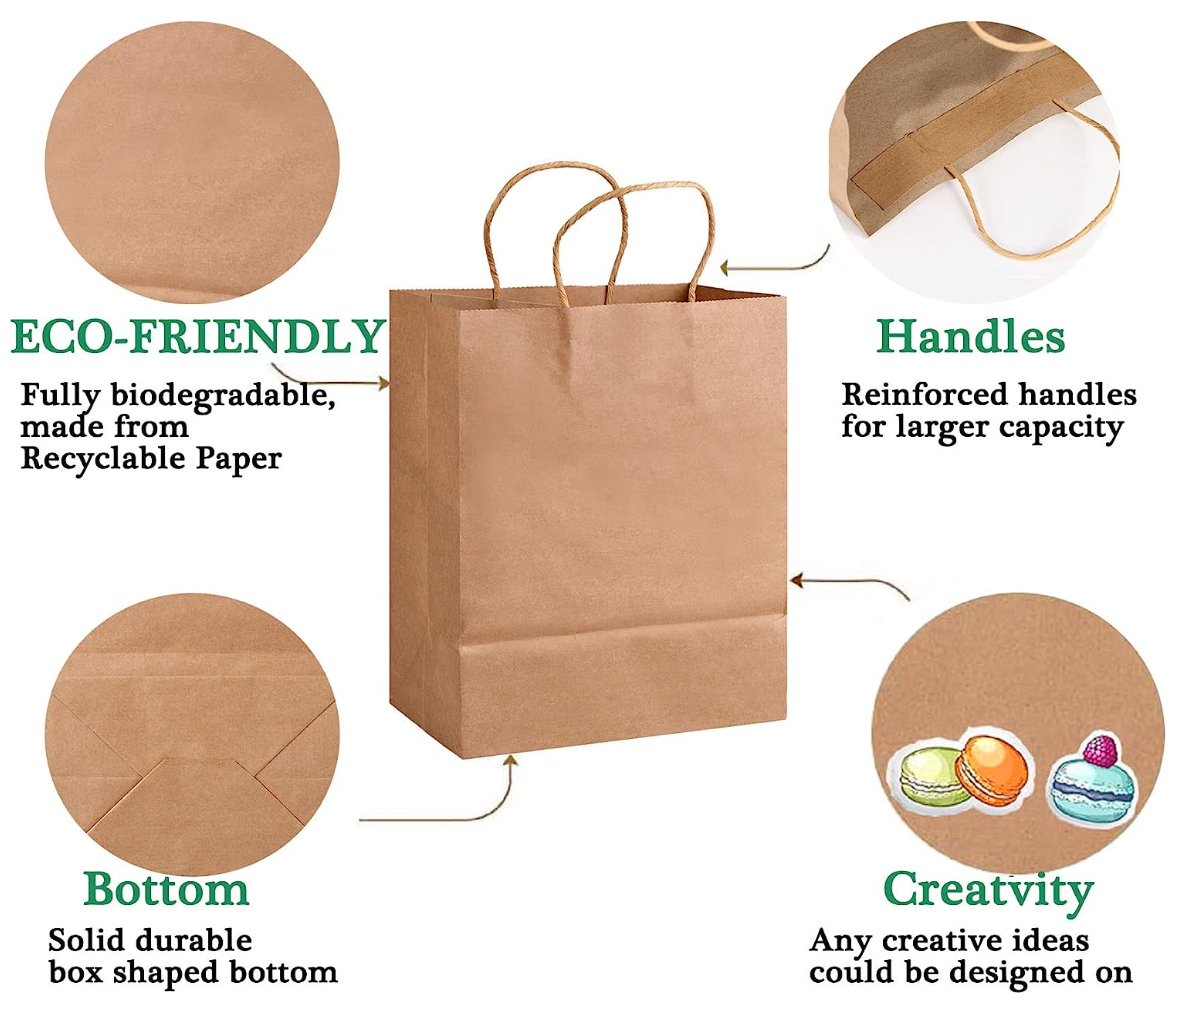 Eco-Friendly and Sturdy 100 Pack of Brown Kraft Paper Bags with Handles for Shopping and Gift-Giving elkanah.store